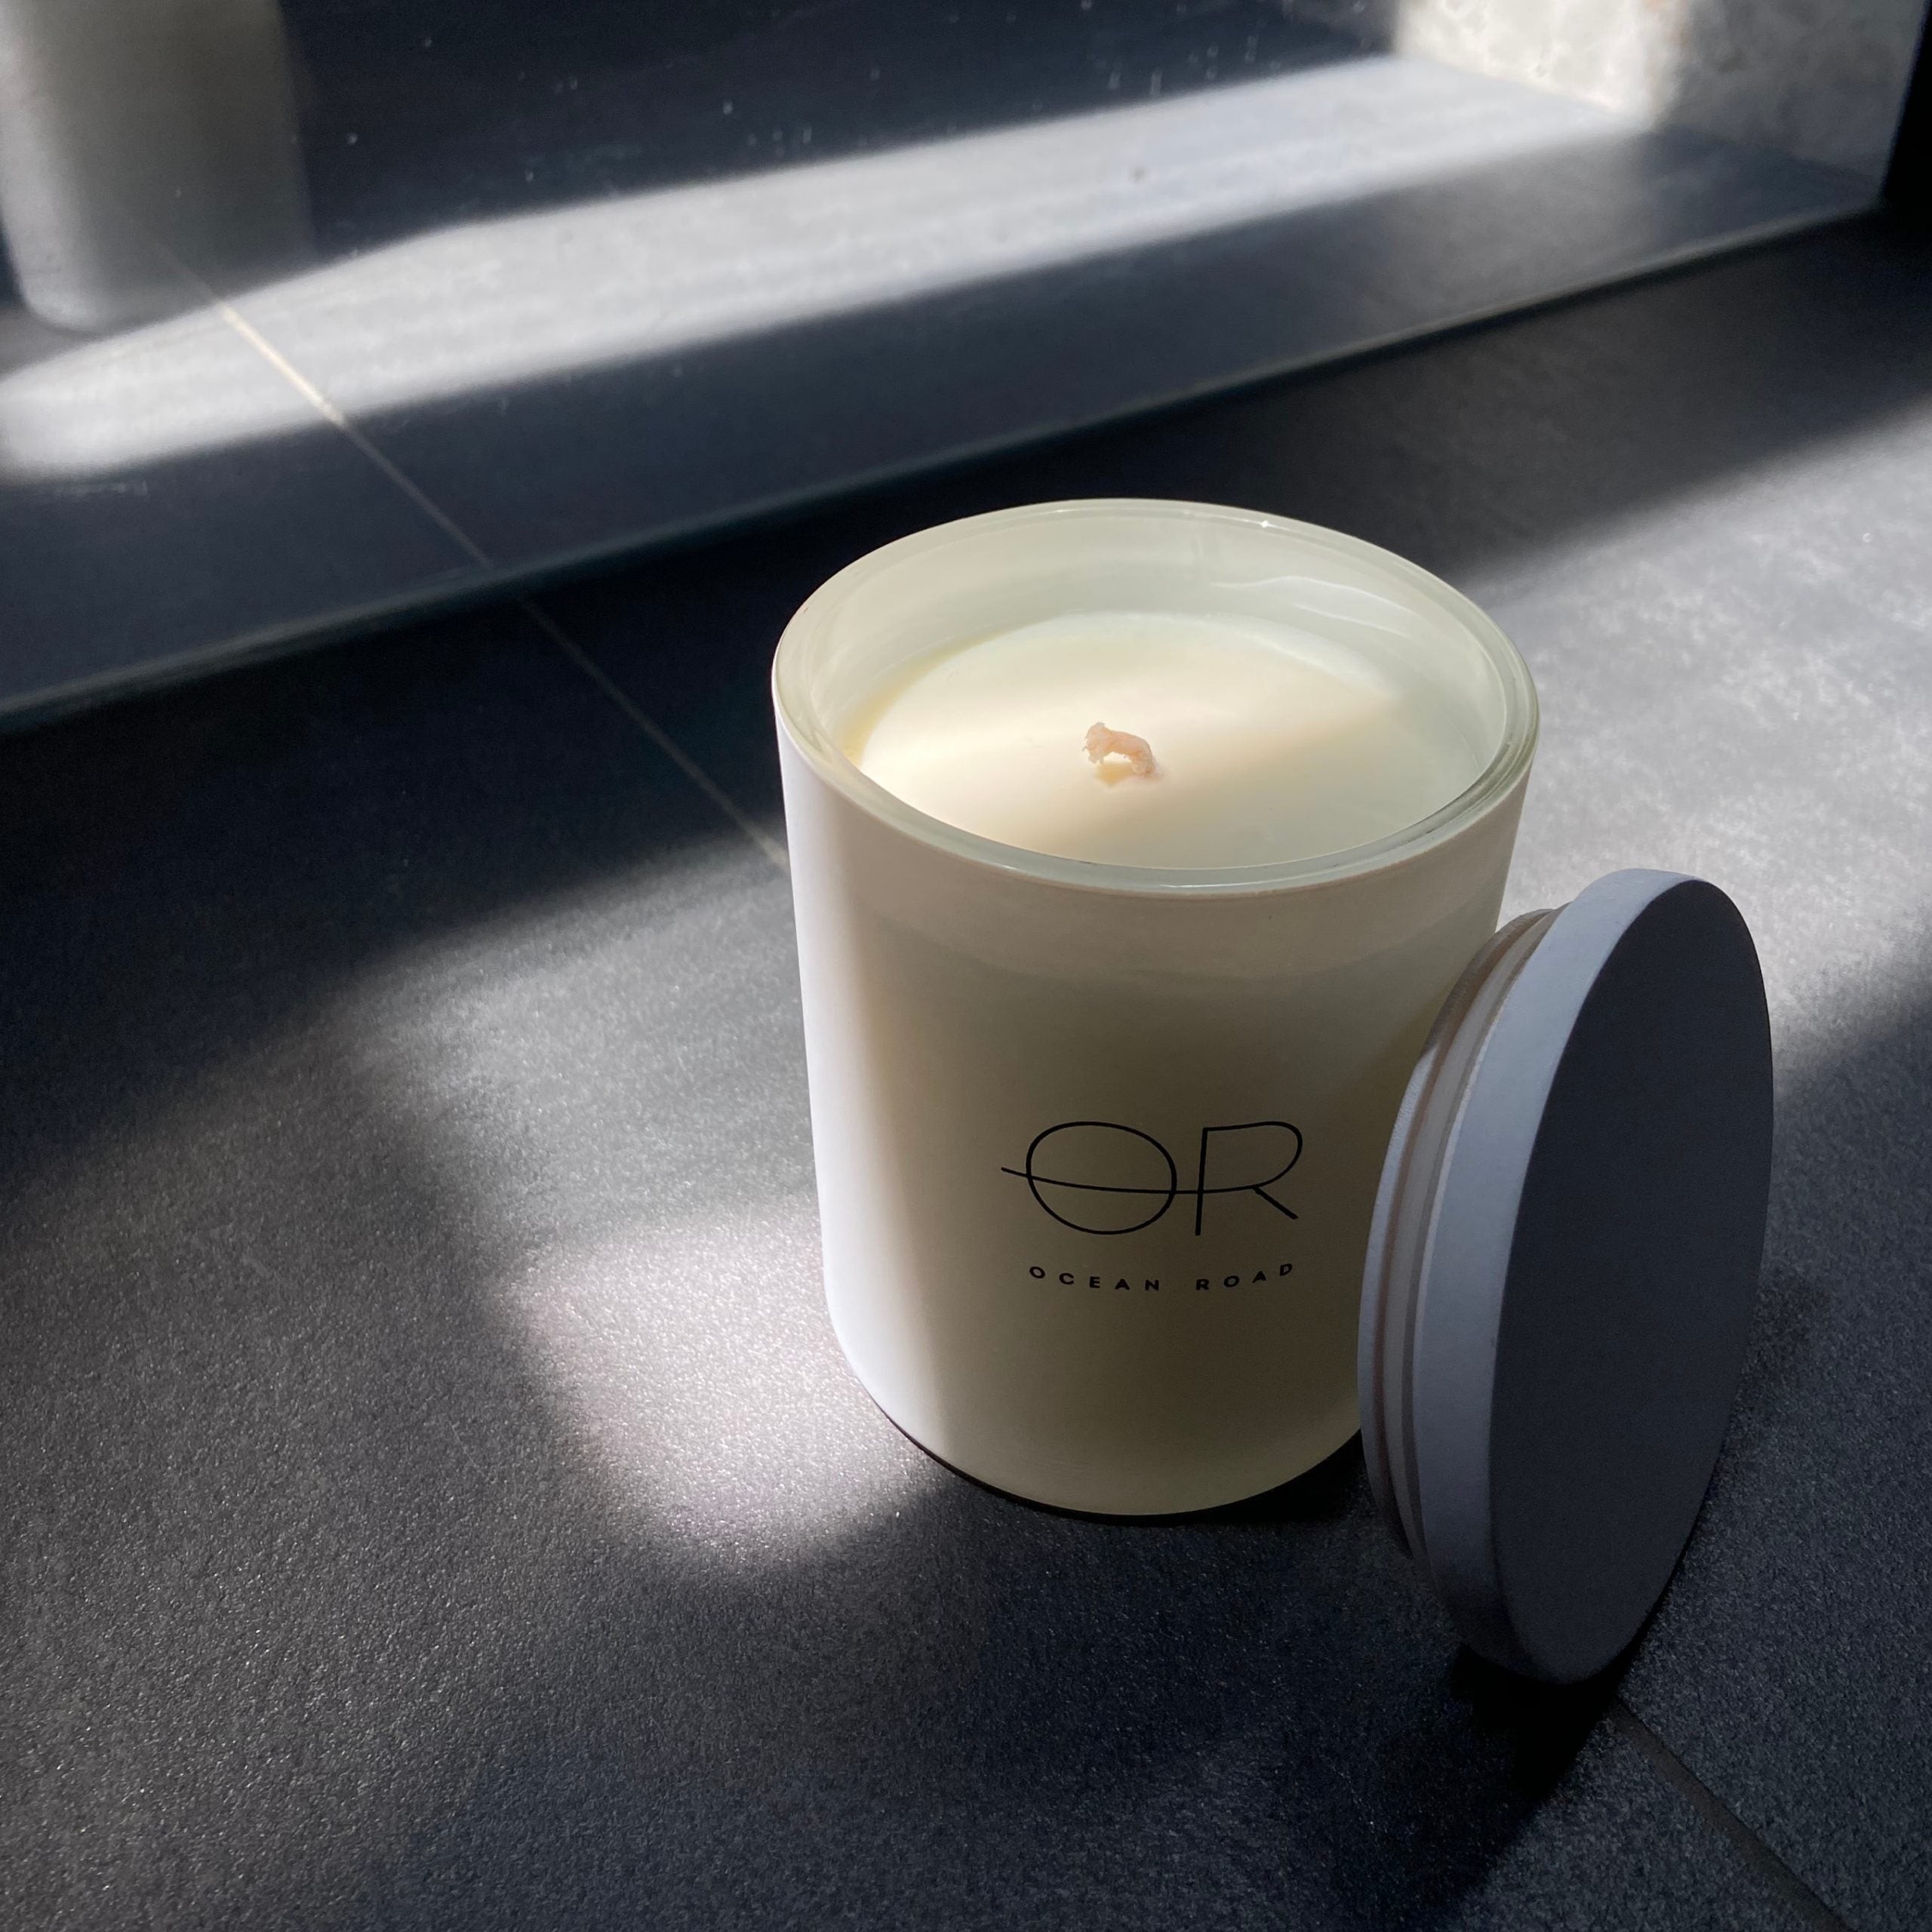 Ocean Road Scented candle